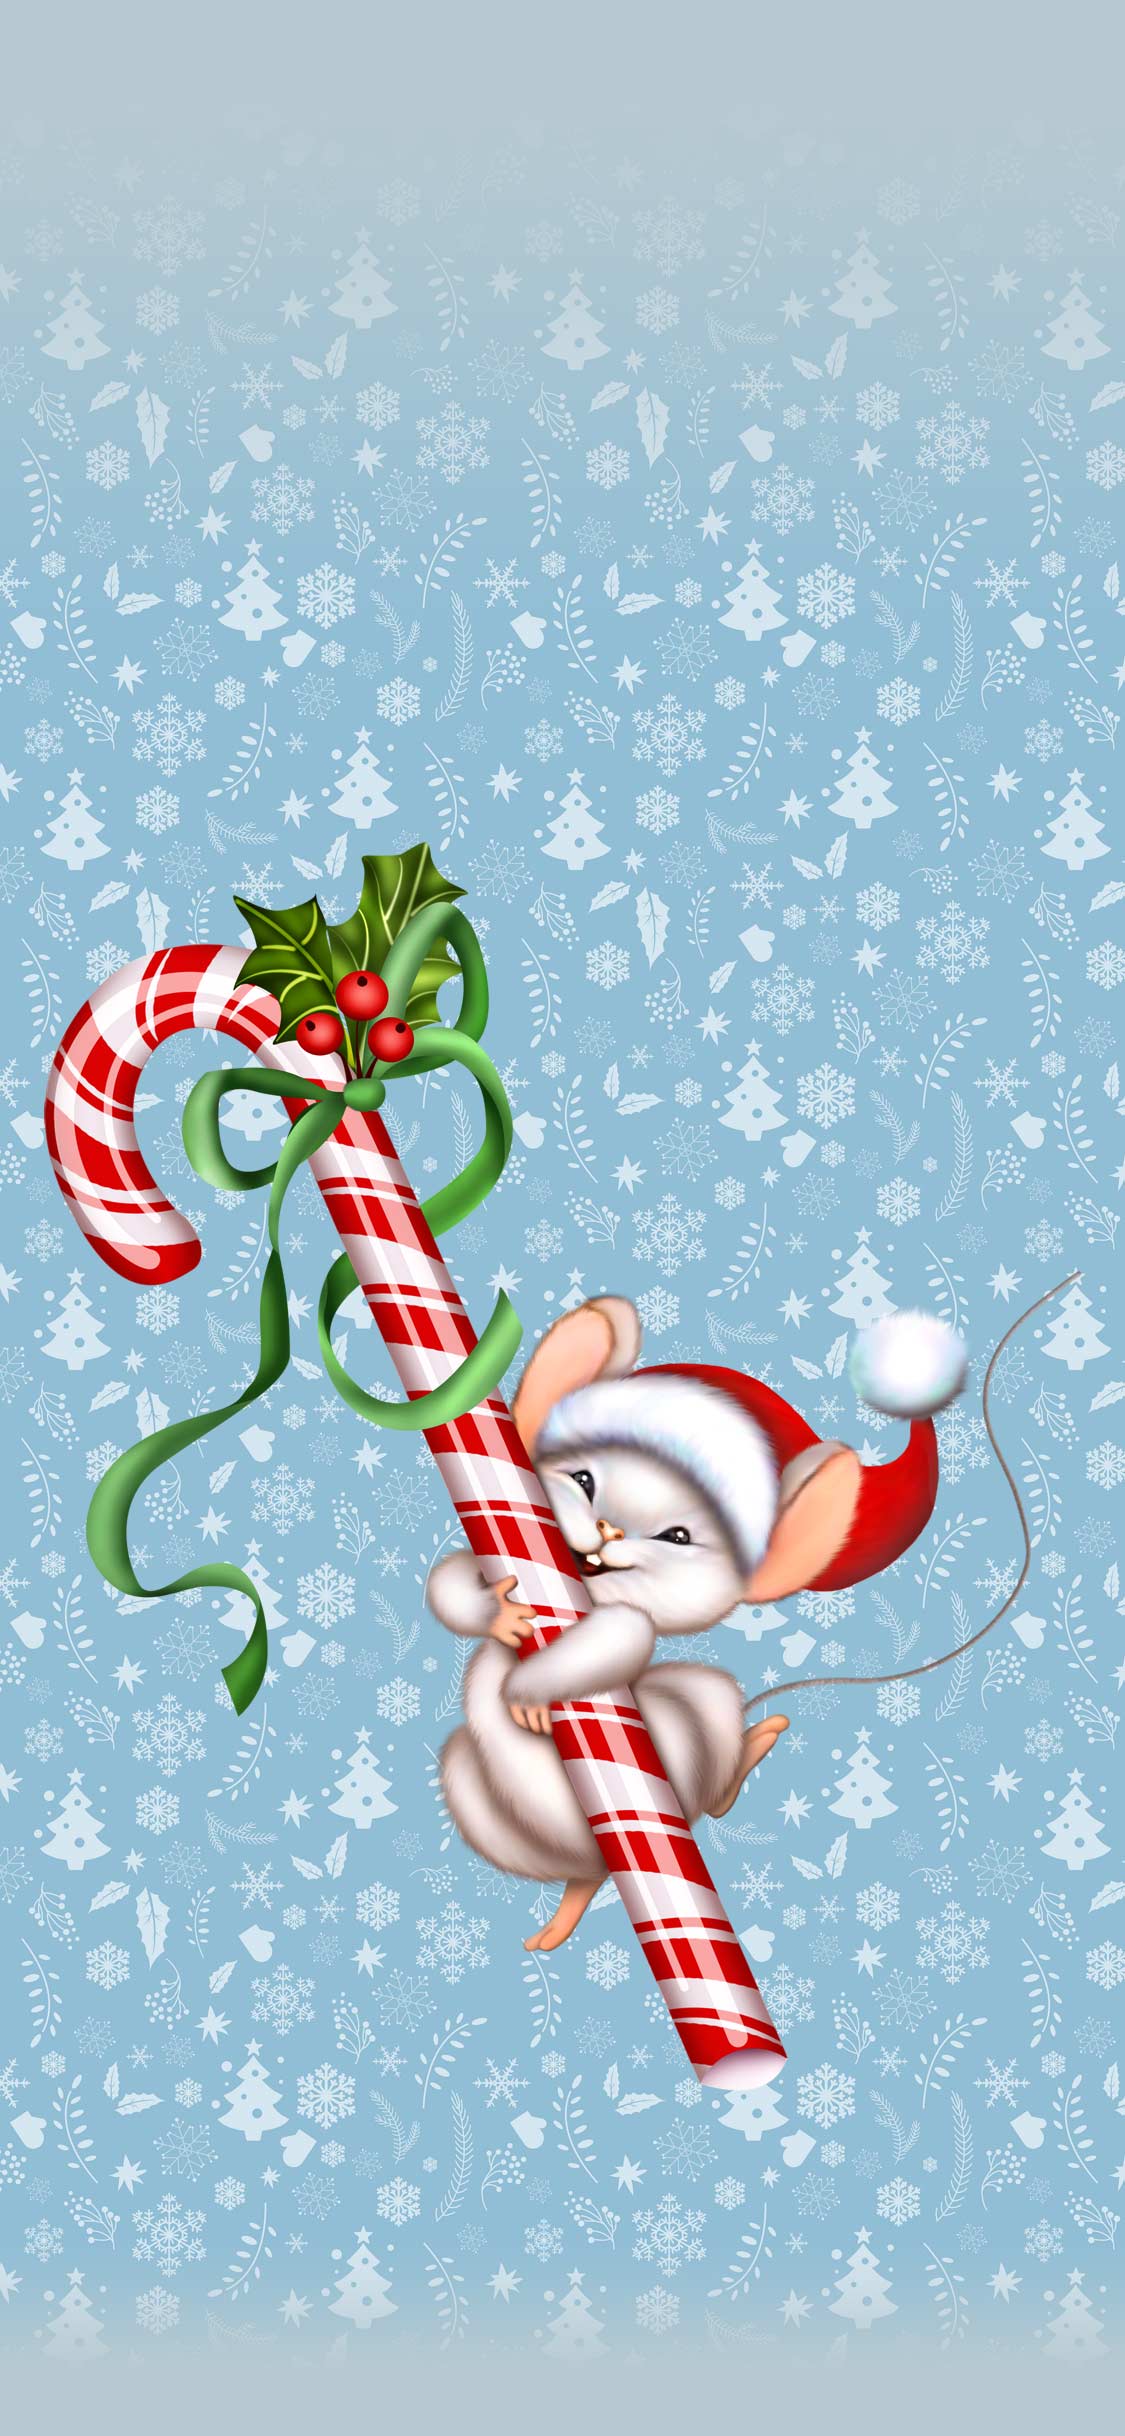 Cute Candy Cane Wallpaper - KoLPaPer - Awesome Free HD Wallpapers